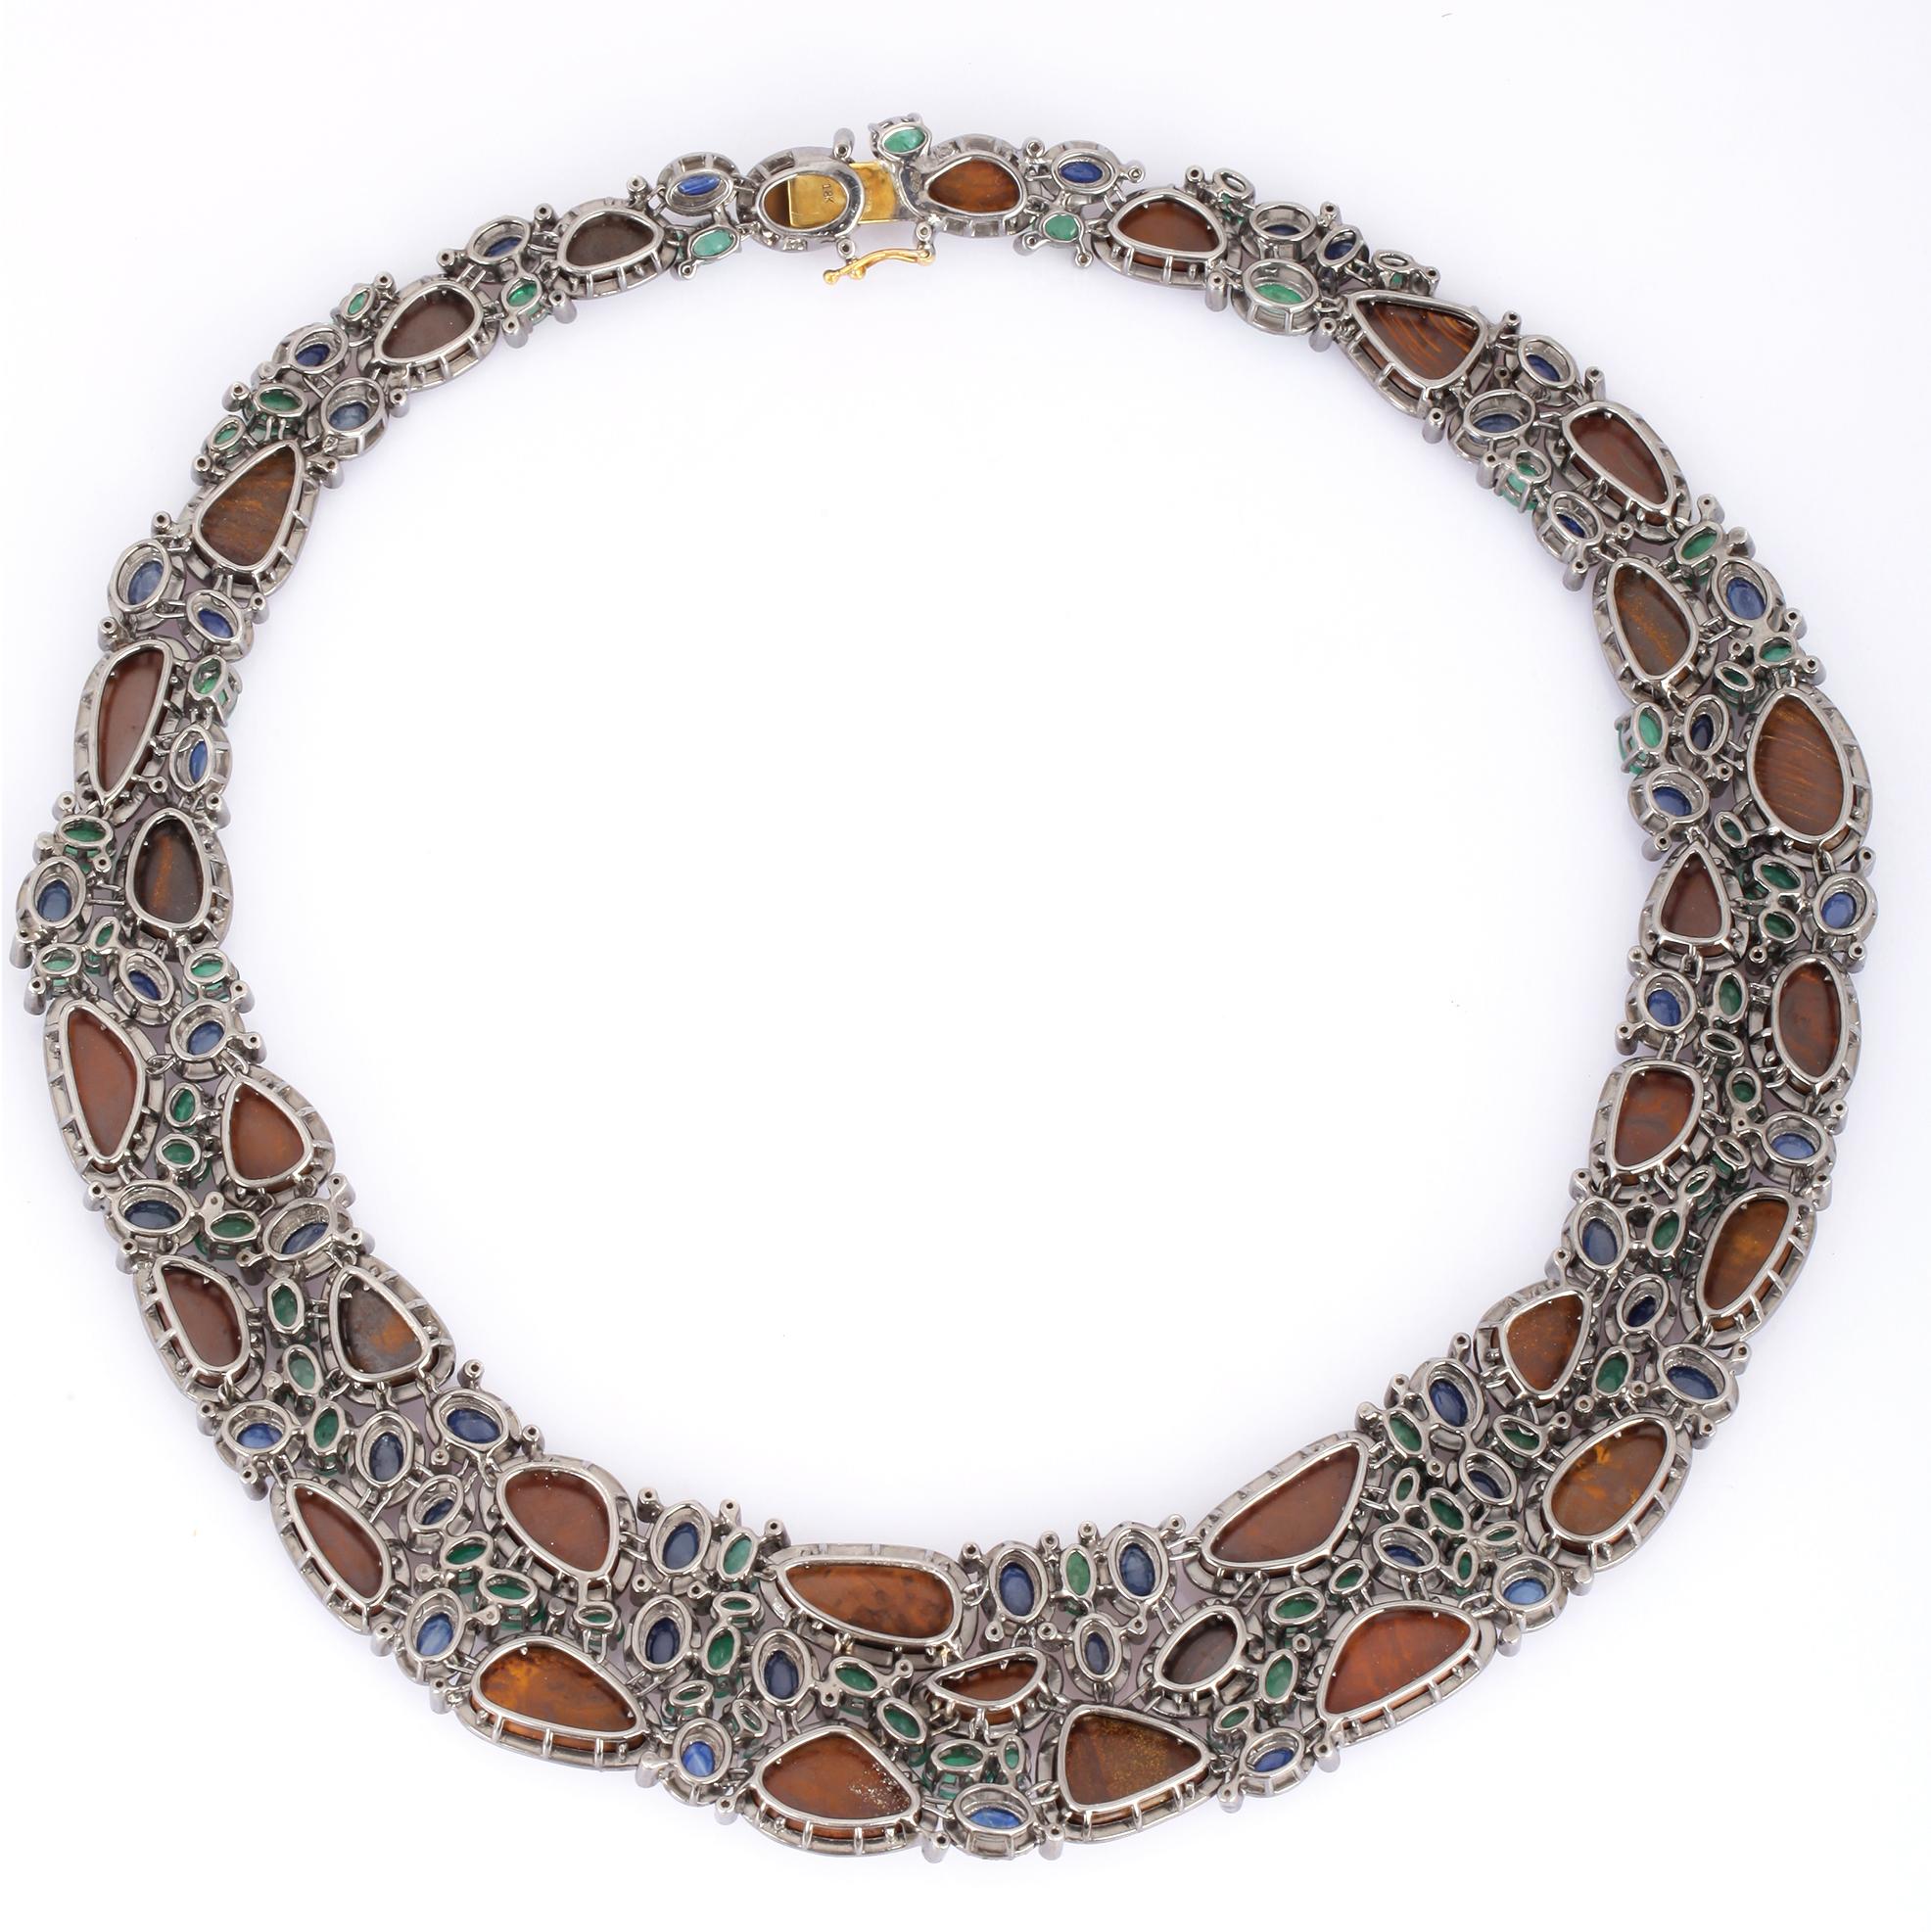 This stunning statement necklace is crafted in 18-karat gold and sterling silver. It is hand set in 70.0 carats opal doublets, 22.65 carats emerald, 27.37 carats blue sapphire and 11.41 carats of diamonds. 

FOLLOW  MEGHNA JEWELS storefront to view